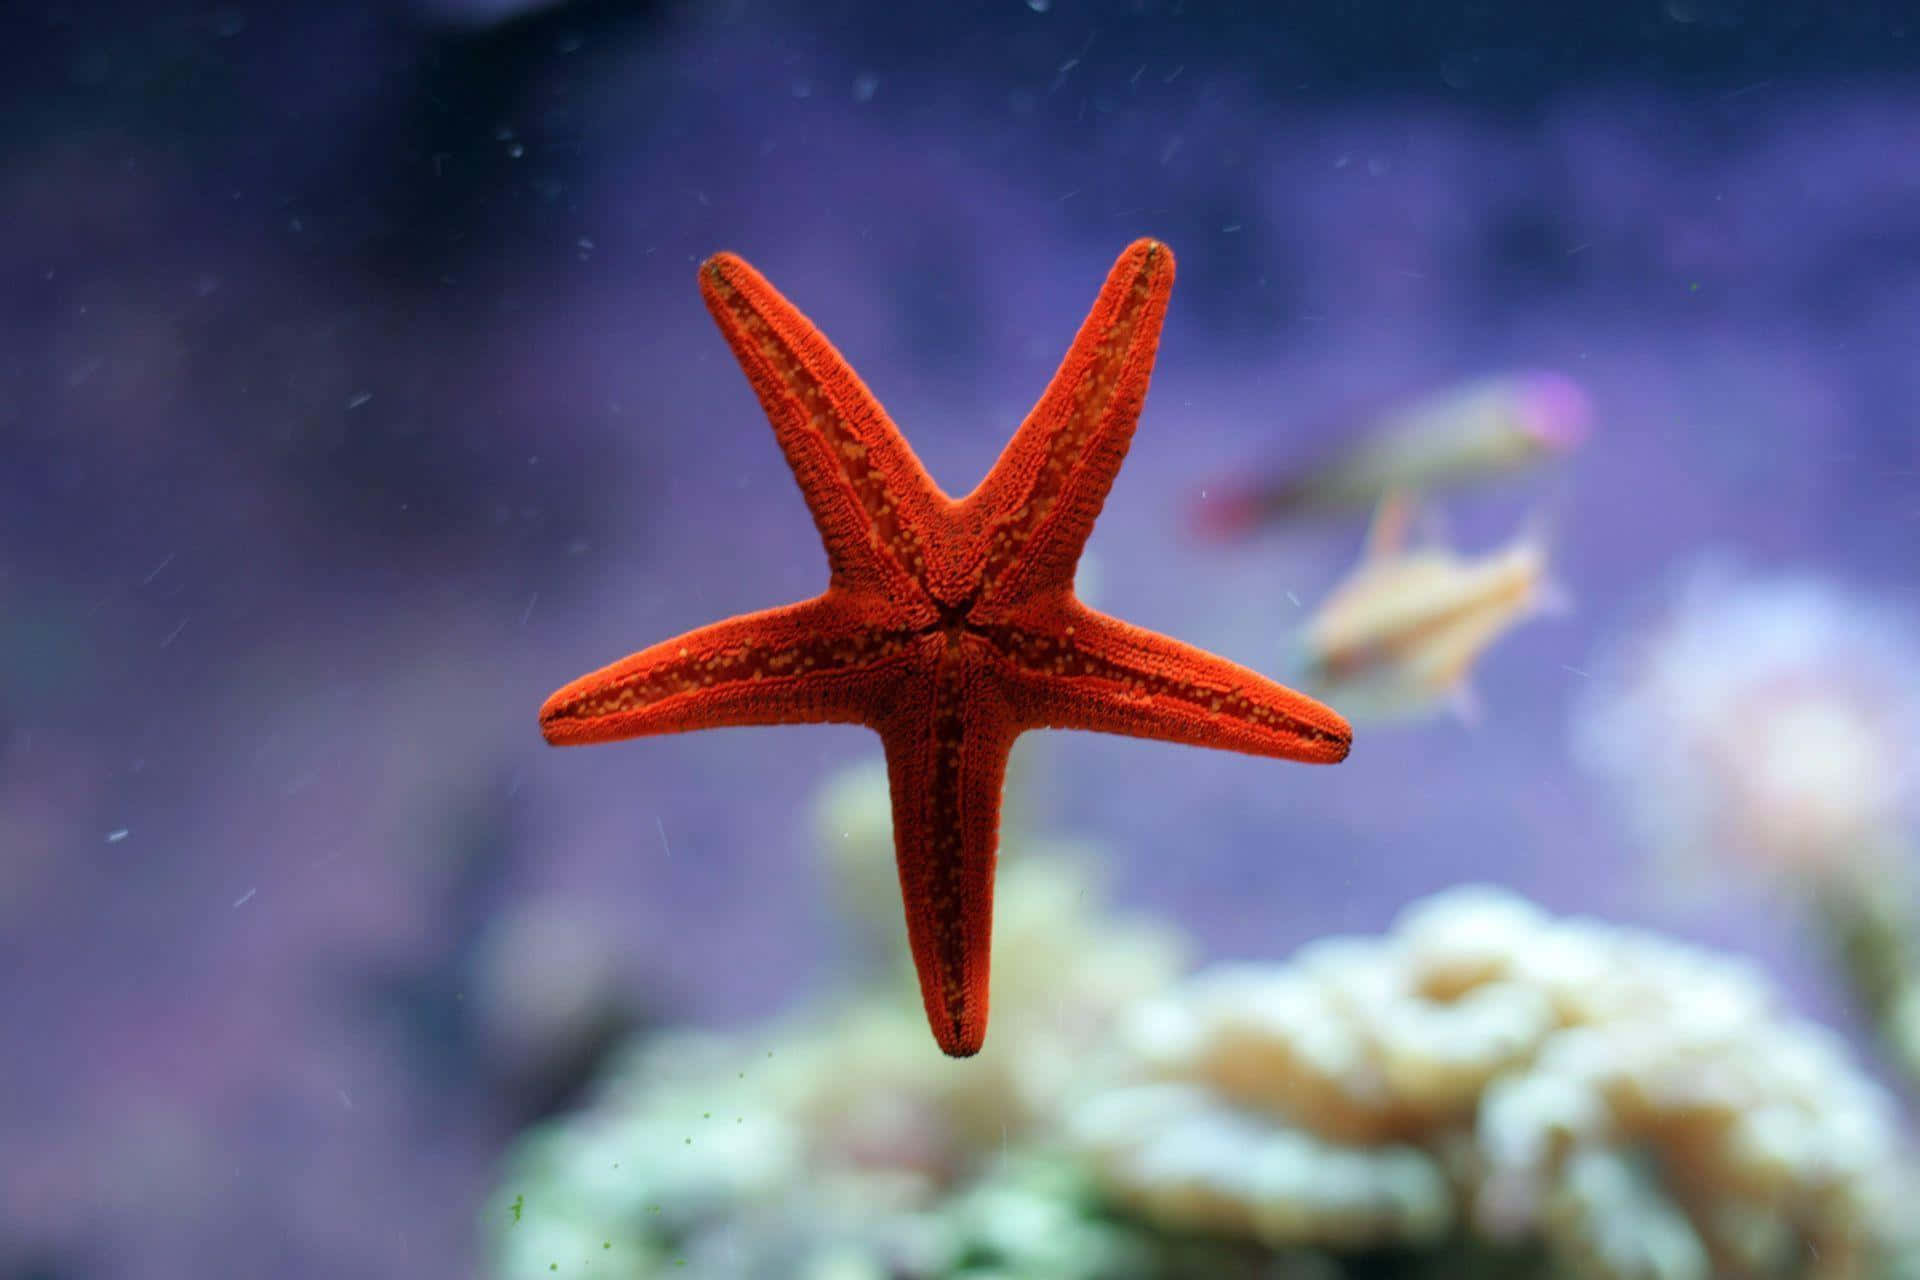 A beautiful starfish in its natural habitat, surrounded by colorful coral.